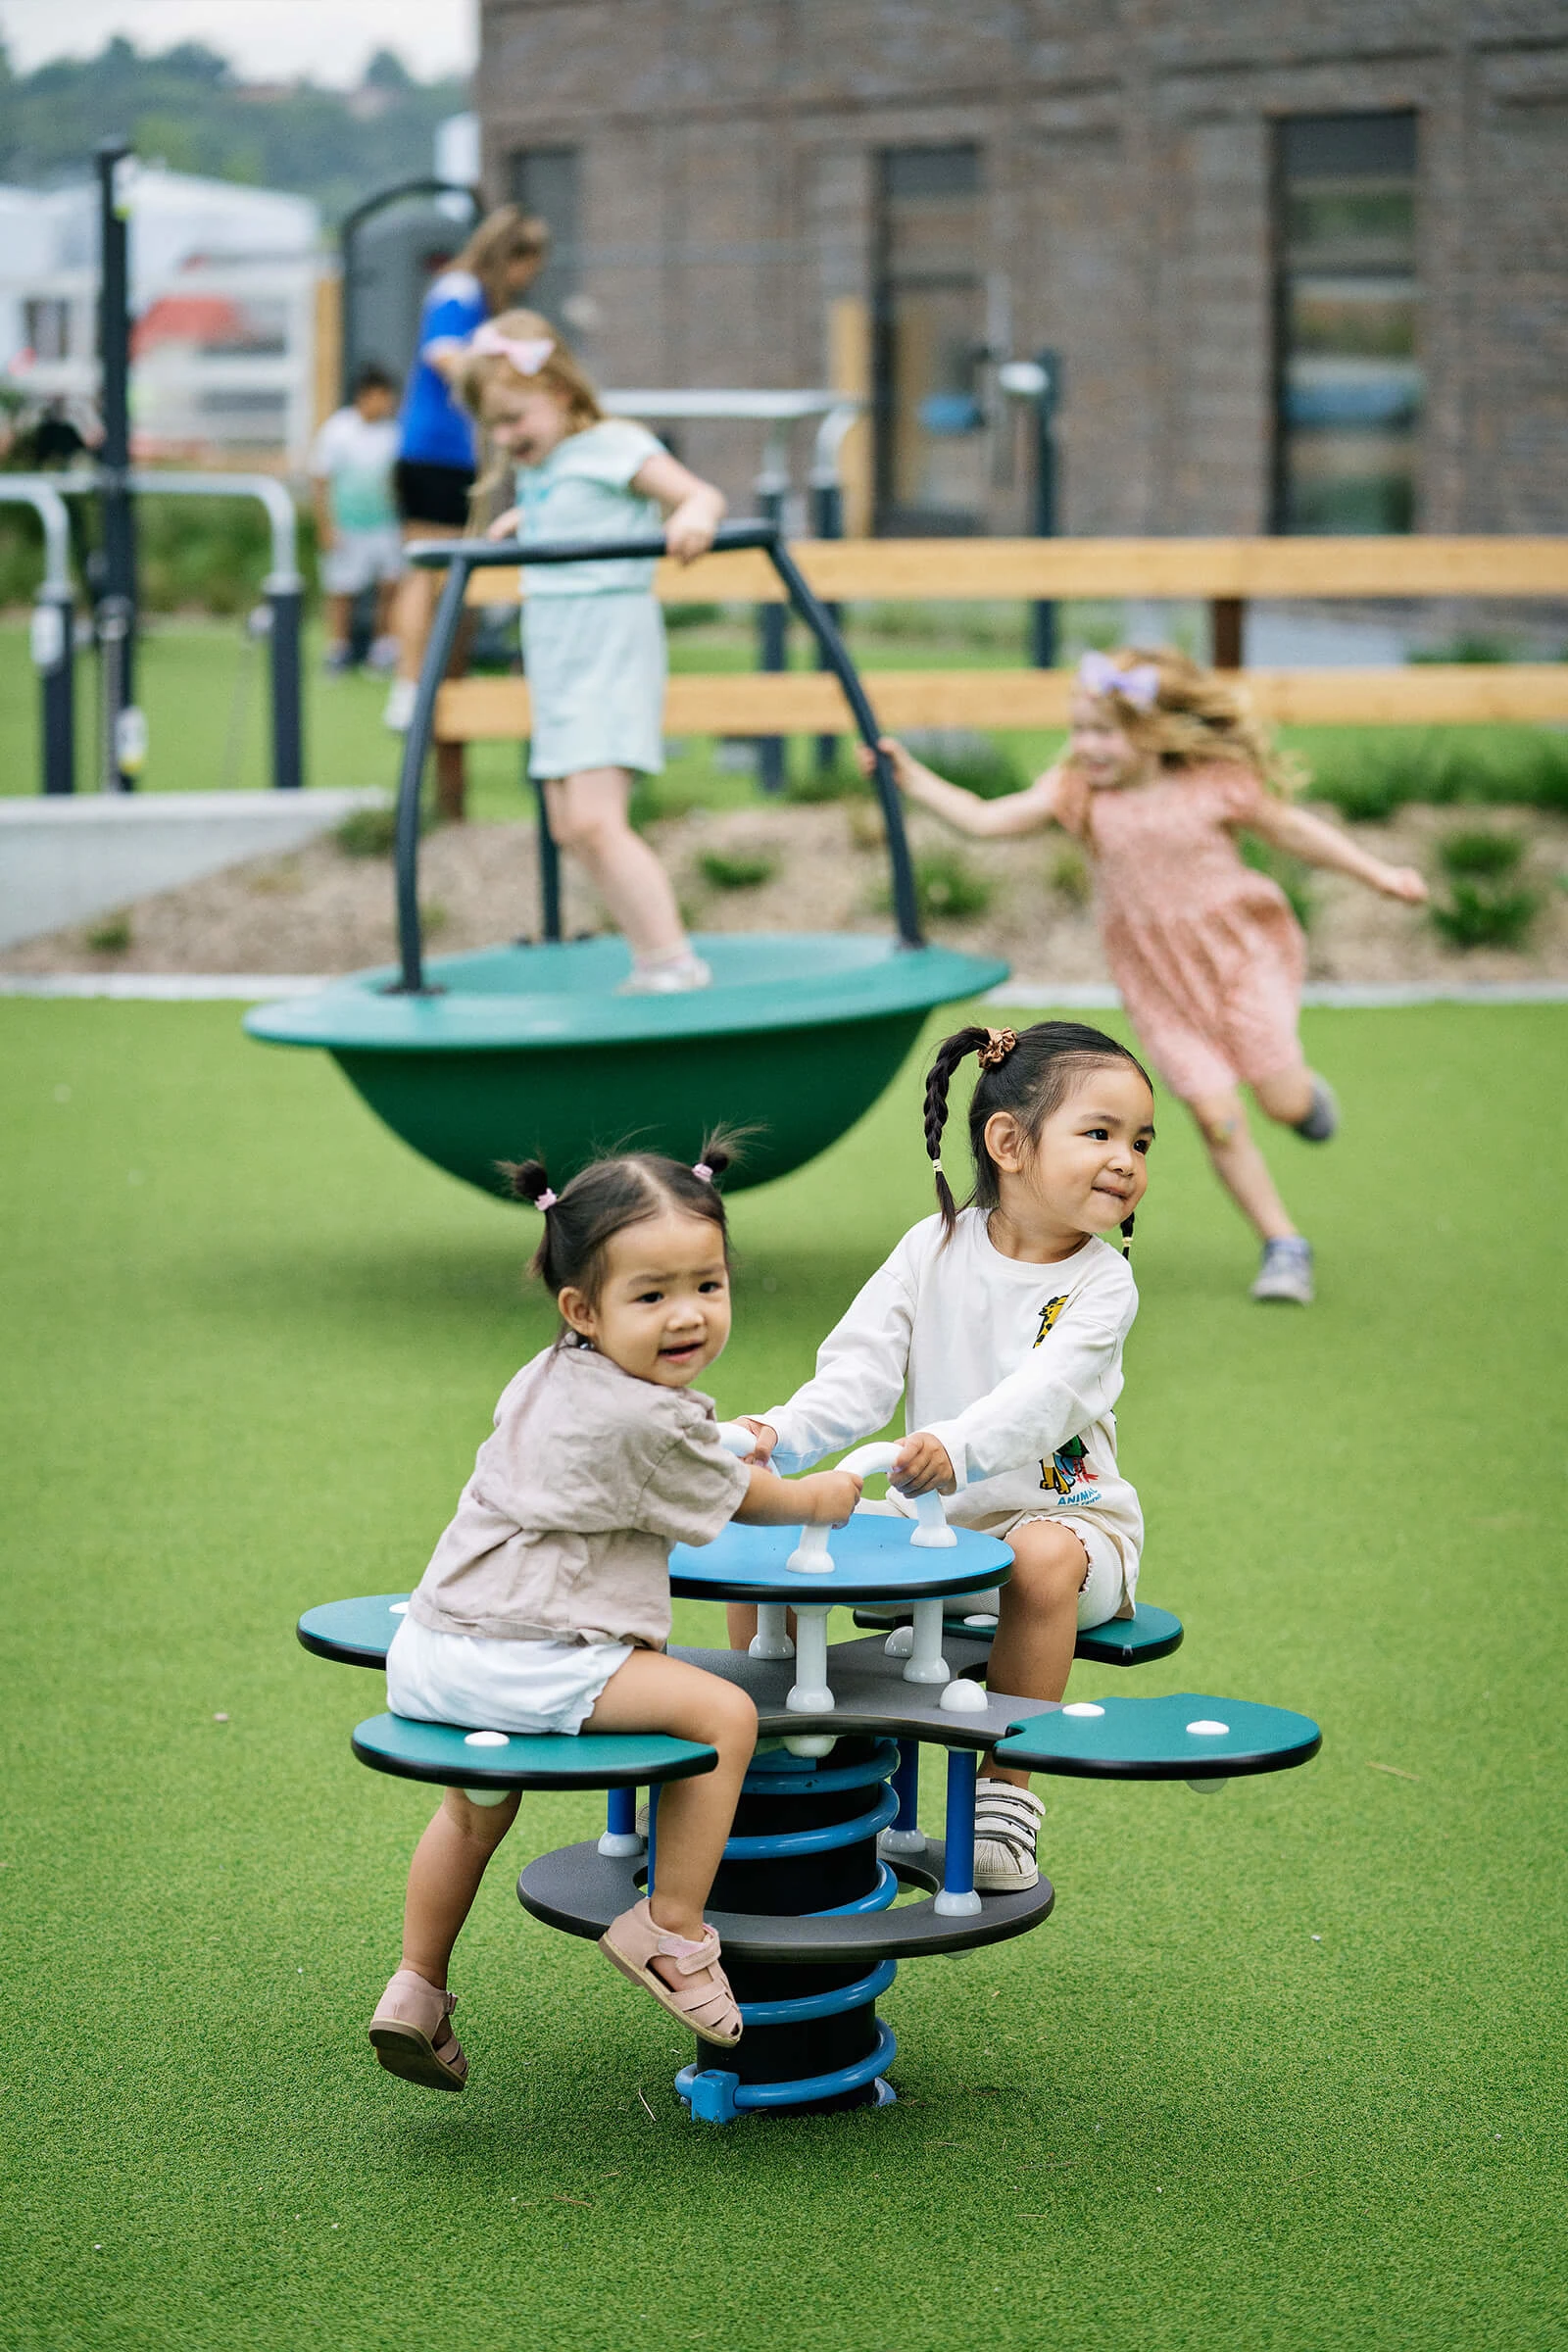 playground equipment for 1-3 year-olds, girls playing on daisy springer